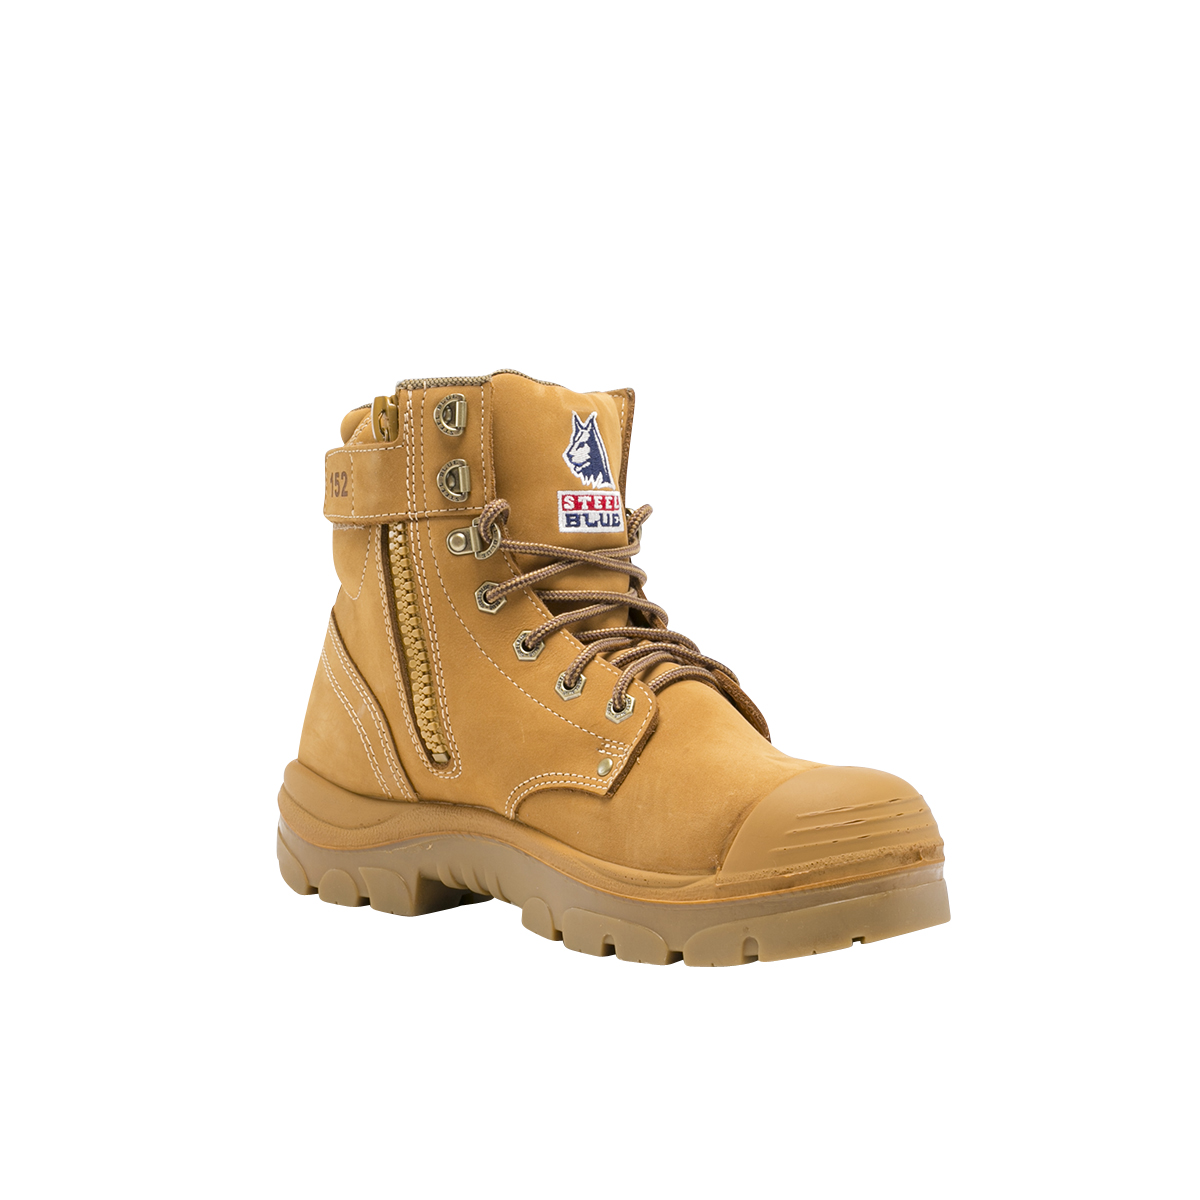 SAFETY BOOT ARGYLE BUMPCAP S10 --ANKLE LACE UP WHEAT NITRILE ZIP